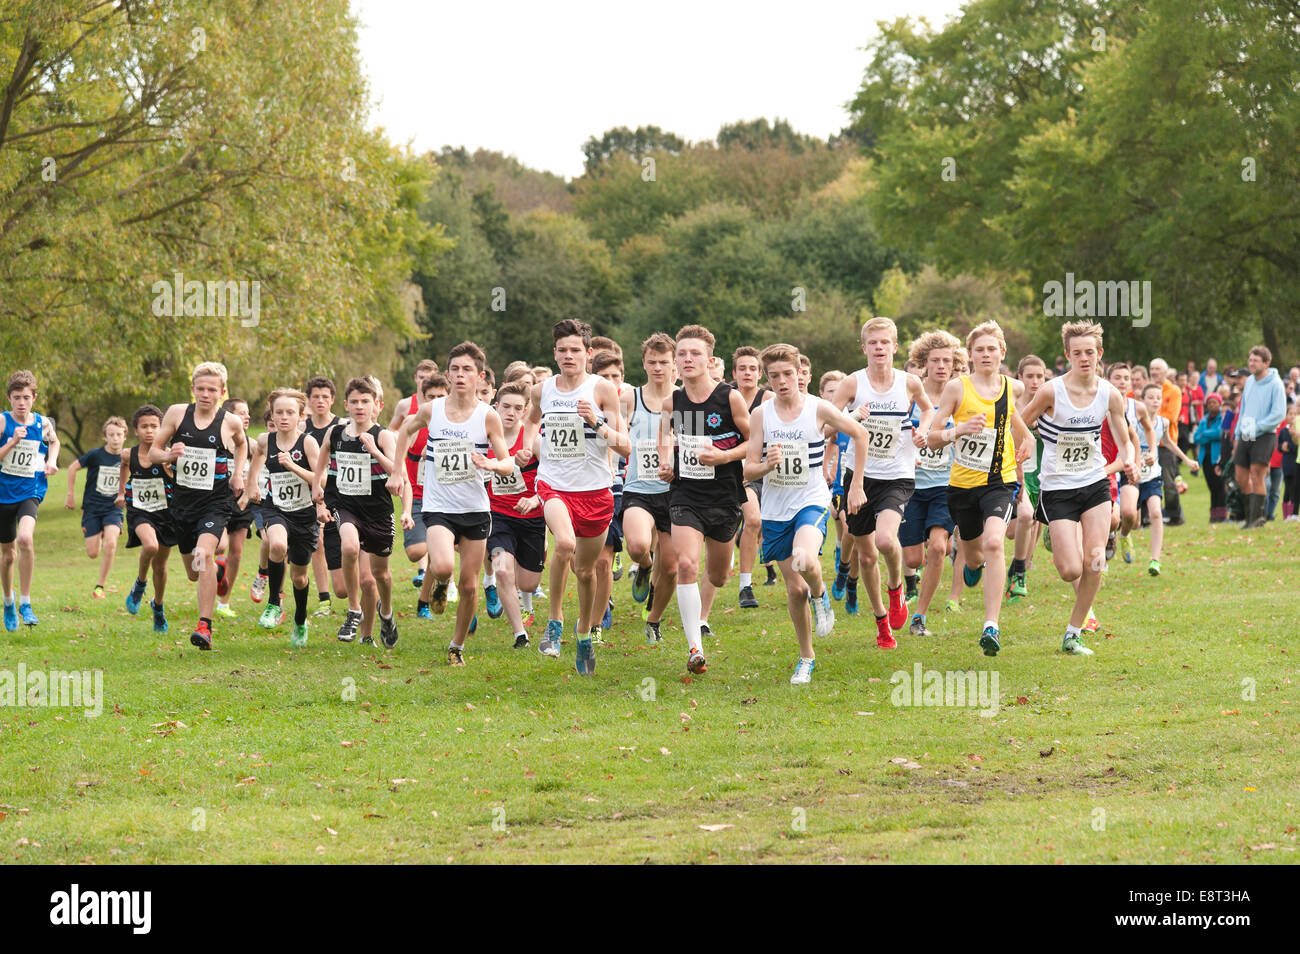 Cross country Kent Athletics team championships events start of race pack sprinting runners joggling for early lead Stock Photo